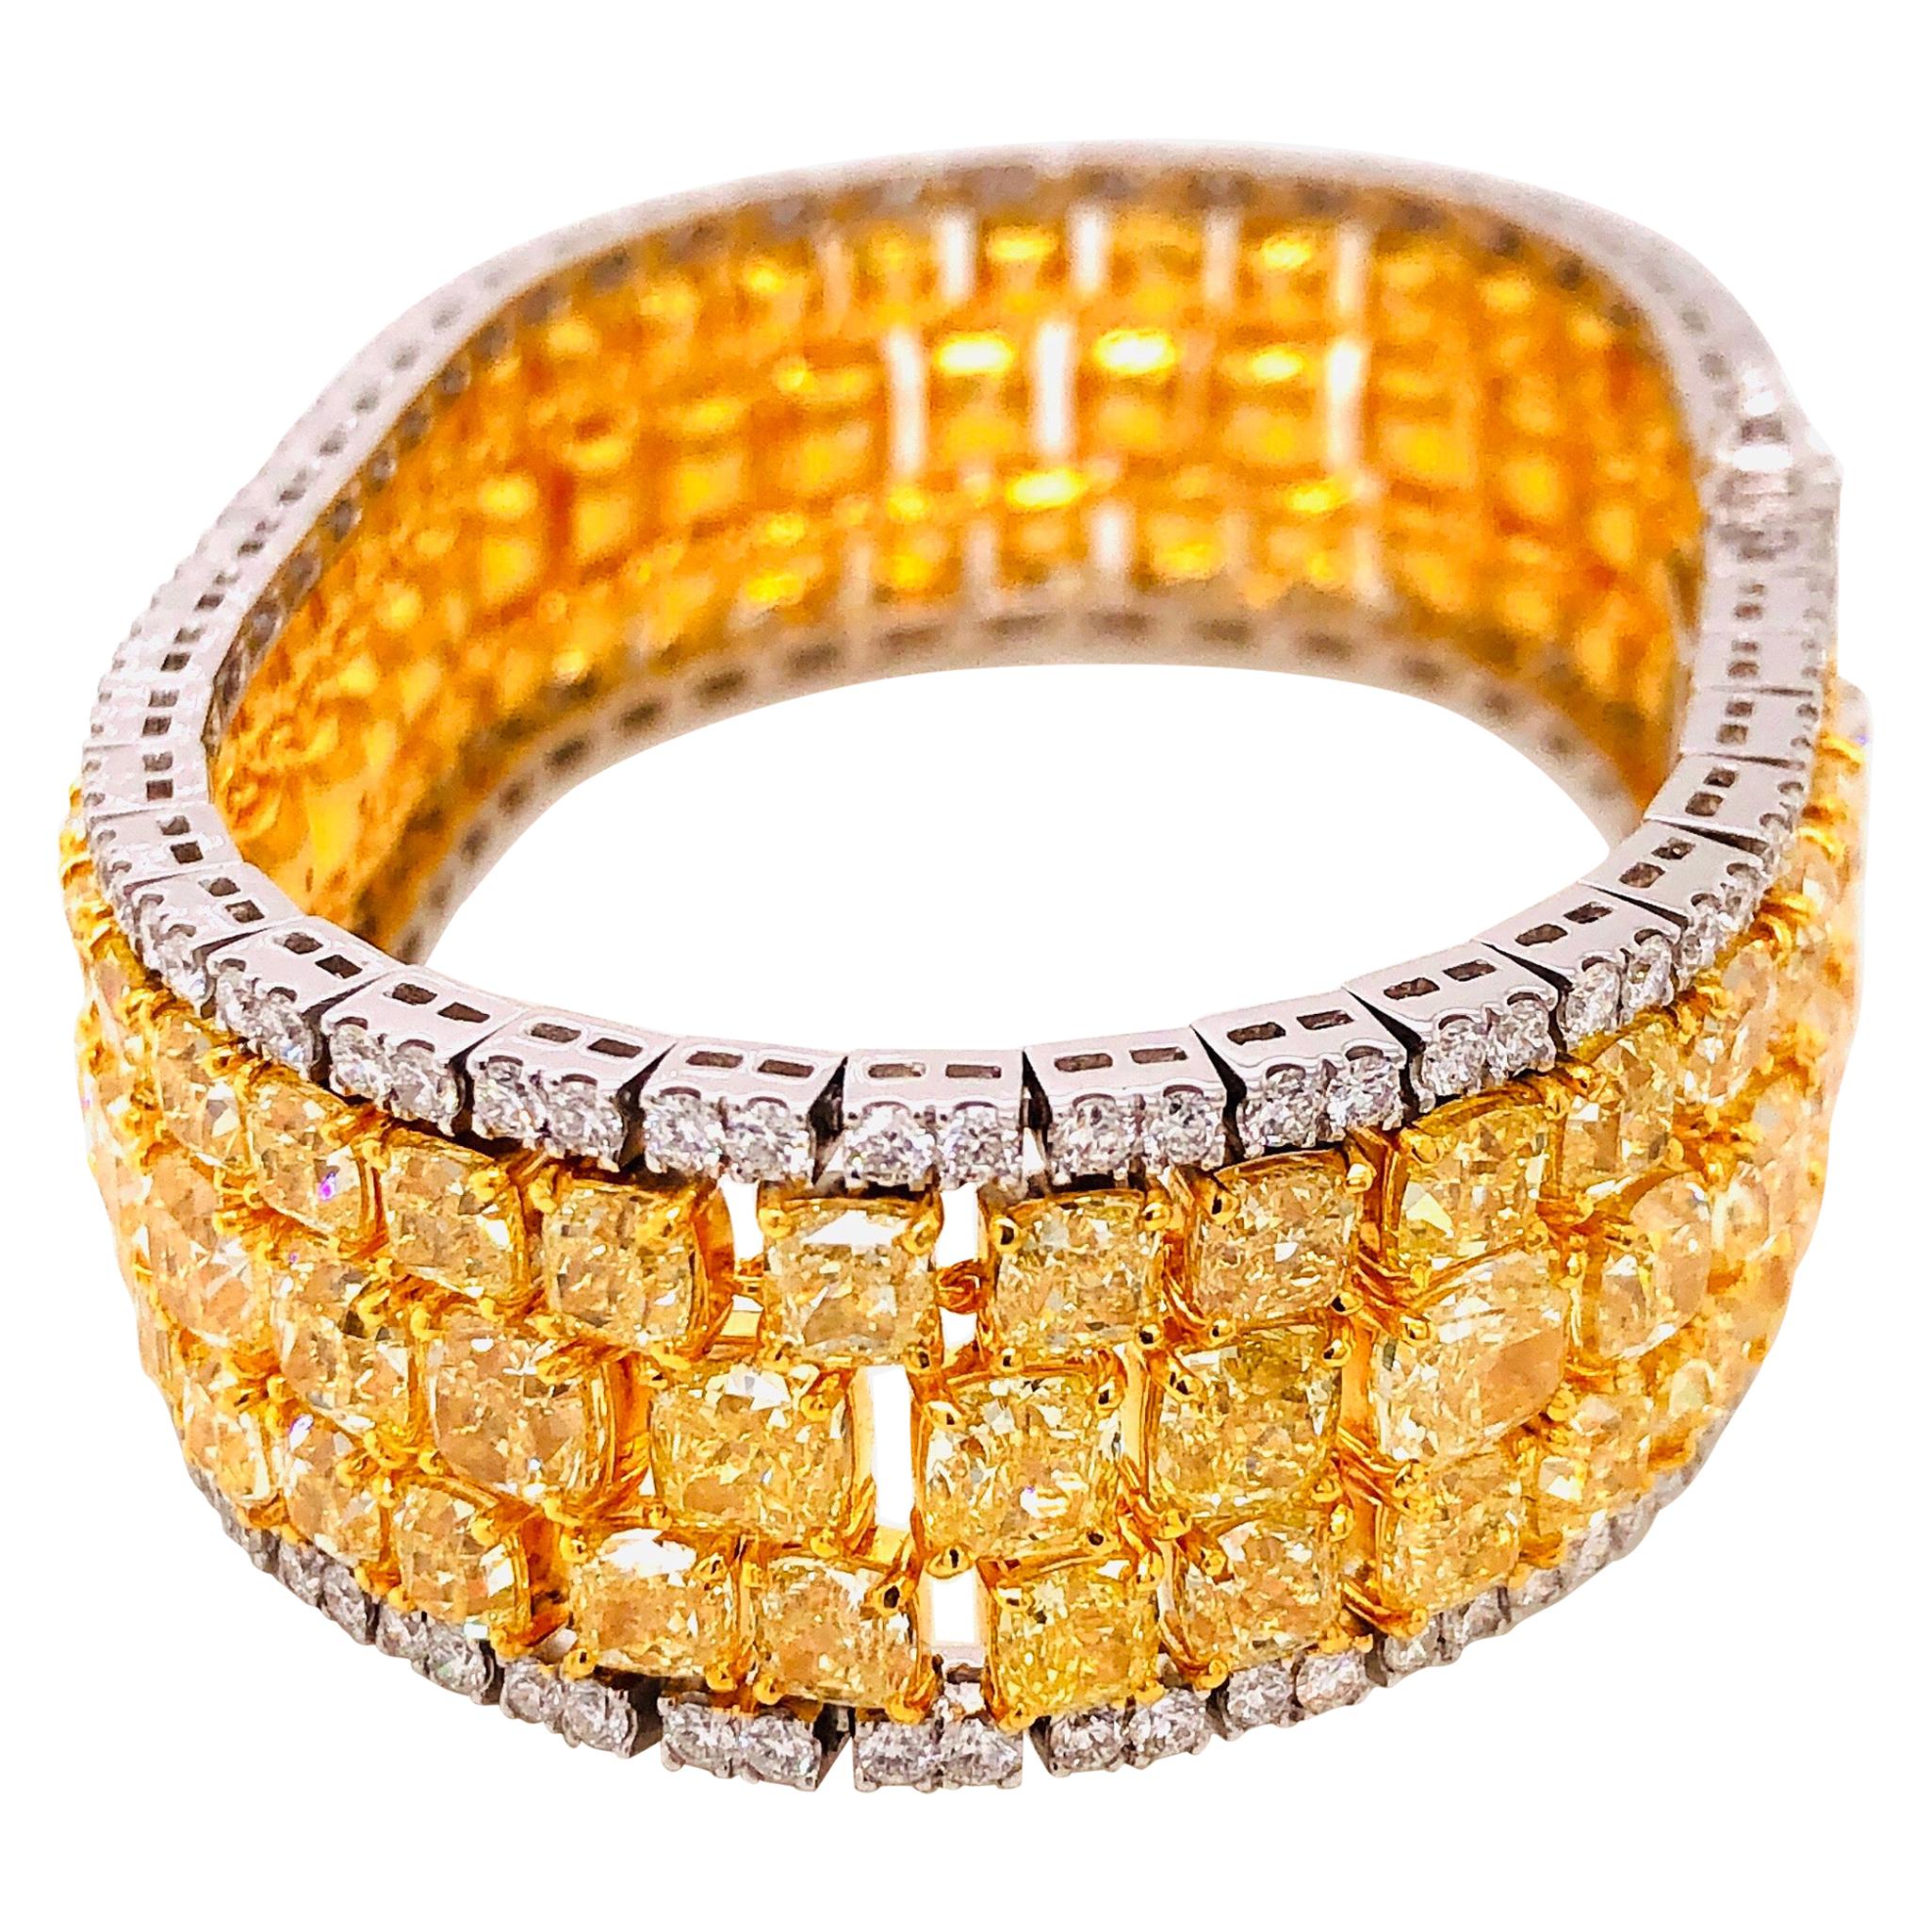 Showcasing a knockout natural yellow diamond bracelet with approximately 46.81ct total weight. Measures 1.80cm wide or 3/4 of an inch and 7 inches long. The color hue and saturation in our opinion face up as fancy intense after setting! Every